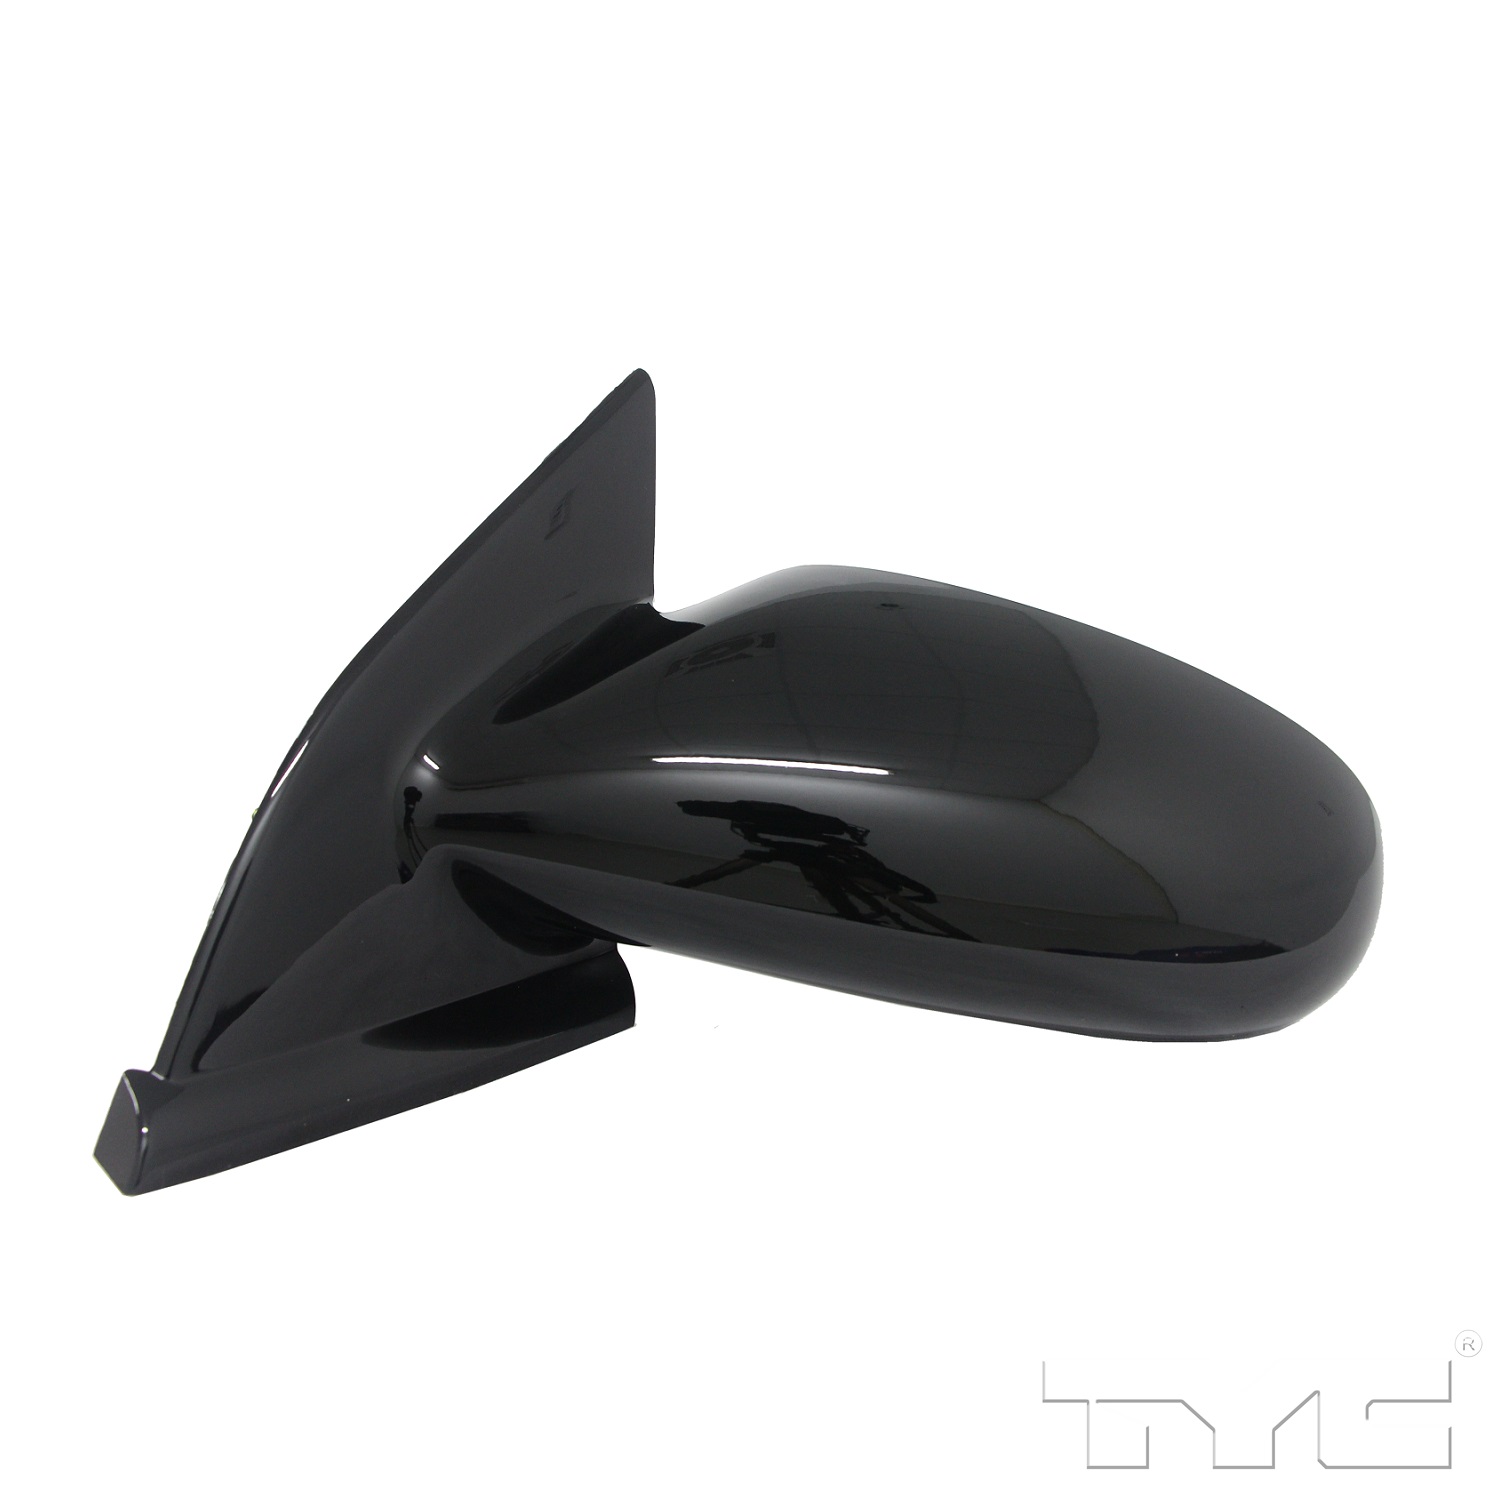 Aftermarket MIRRORS for SATURN - SL1, SL1,96-02,LT Mirror outside rear view